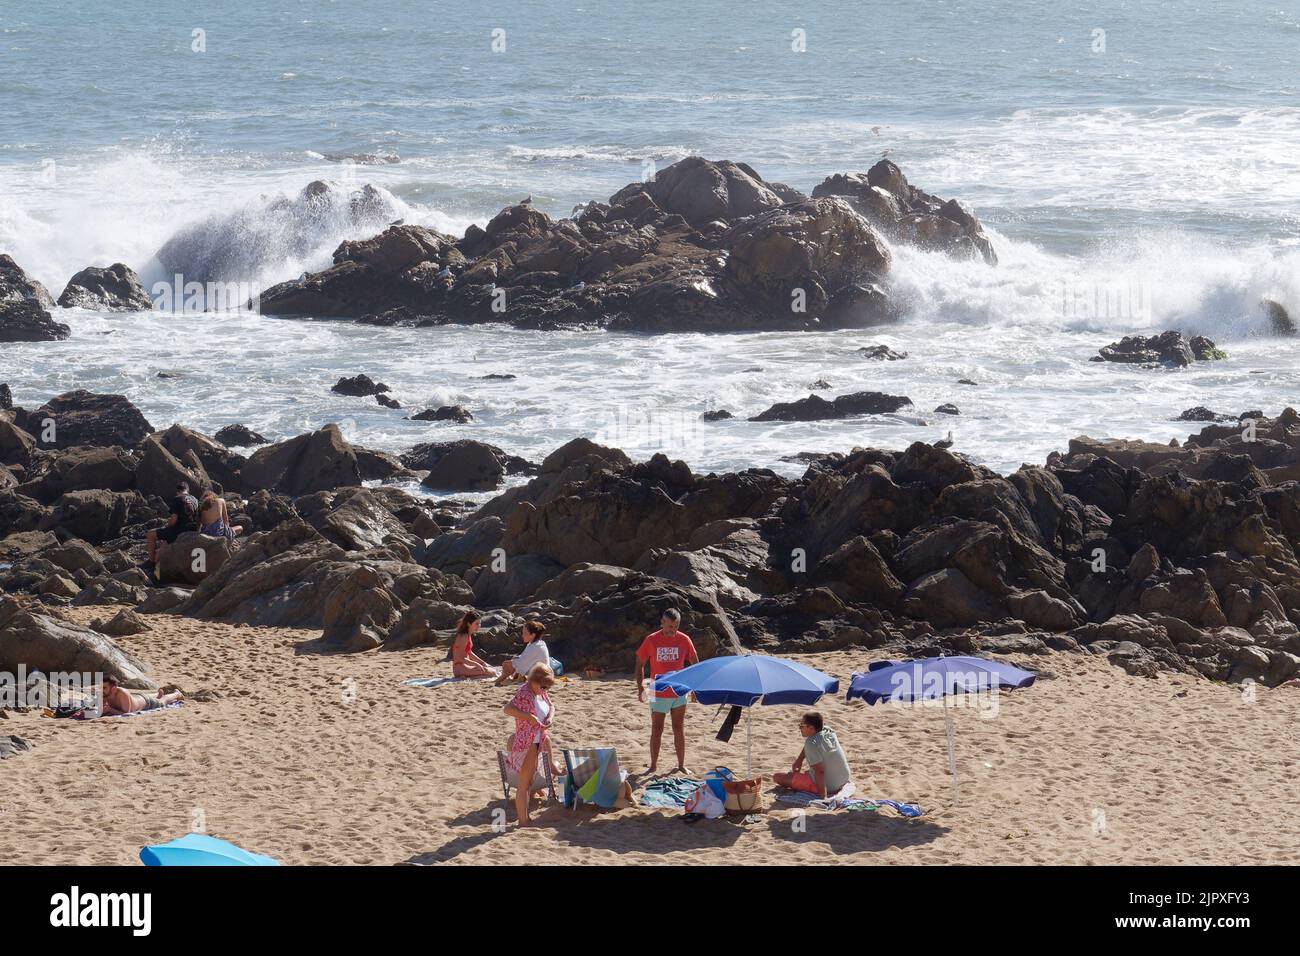 Family enjoying a day on the Foz do Douro beach in the Porto area of Portugal. Waves crash over the rocks as the family sit and relax. Stock Photo